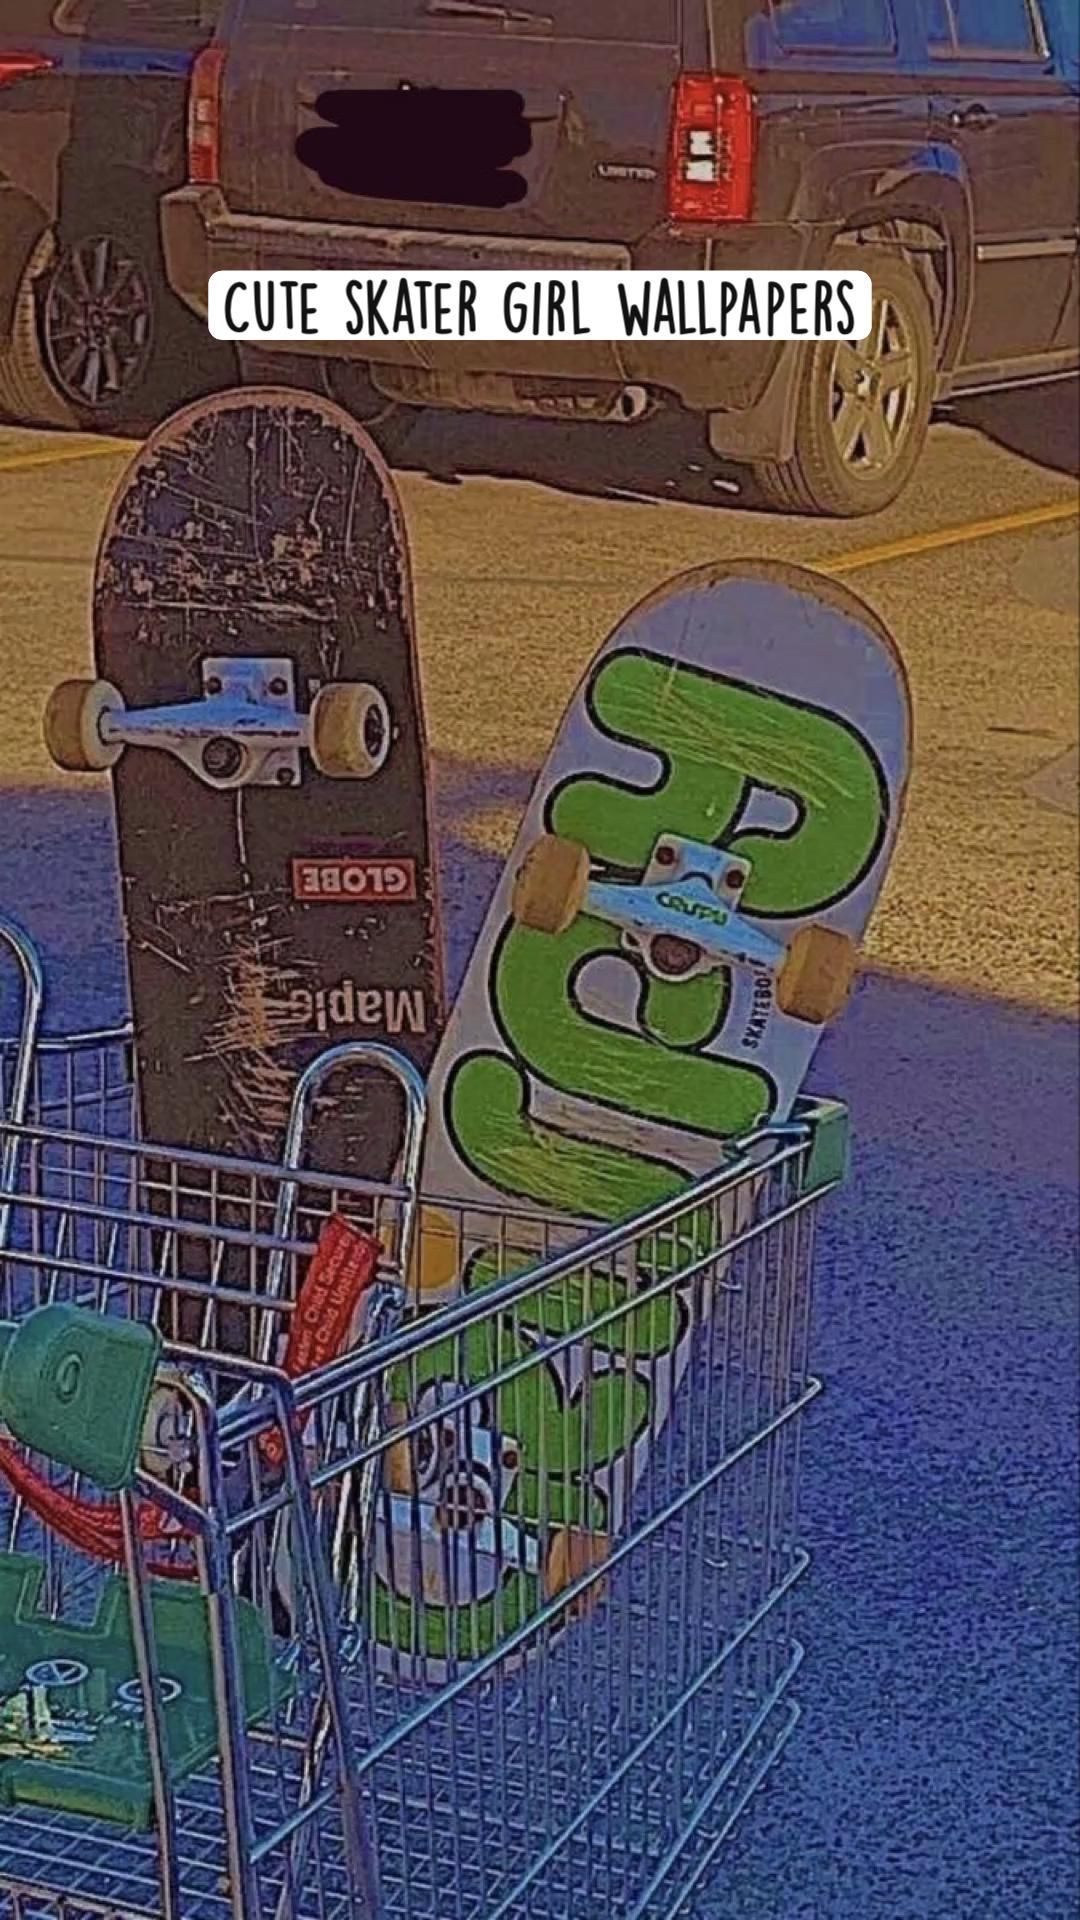 A shopping cart with skateboards in it - Skater